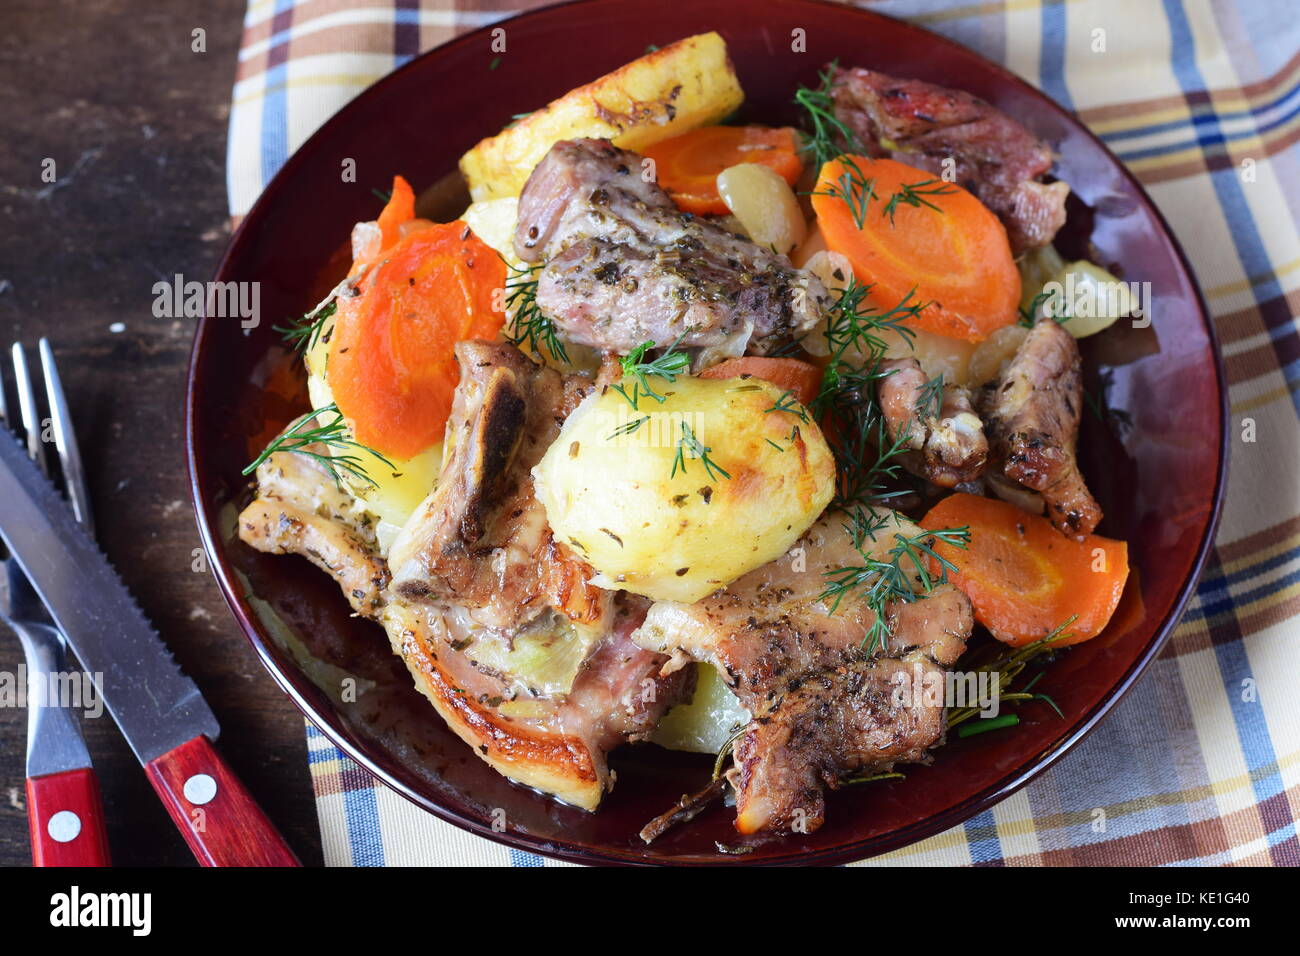 Oven cooked pork with potato, carrots and onion in olive oil and spices in a brown ceramic plate on a wooden background. Home cooking Stock Photo